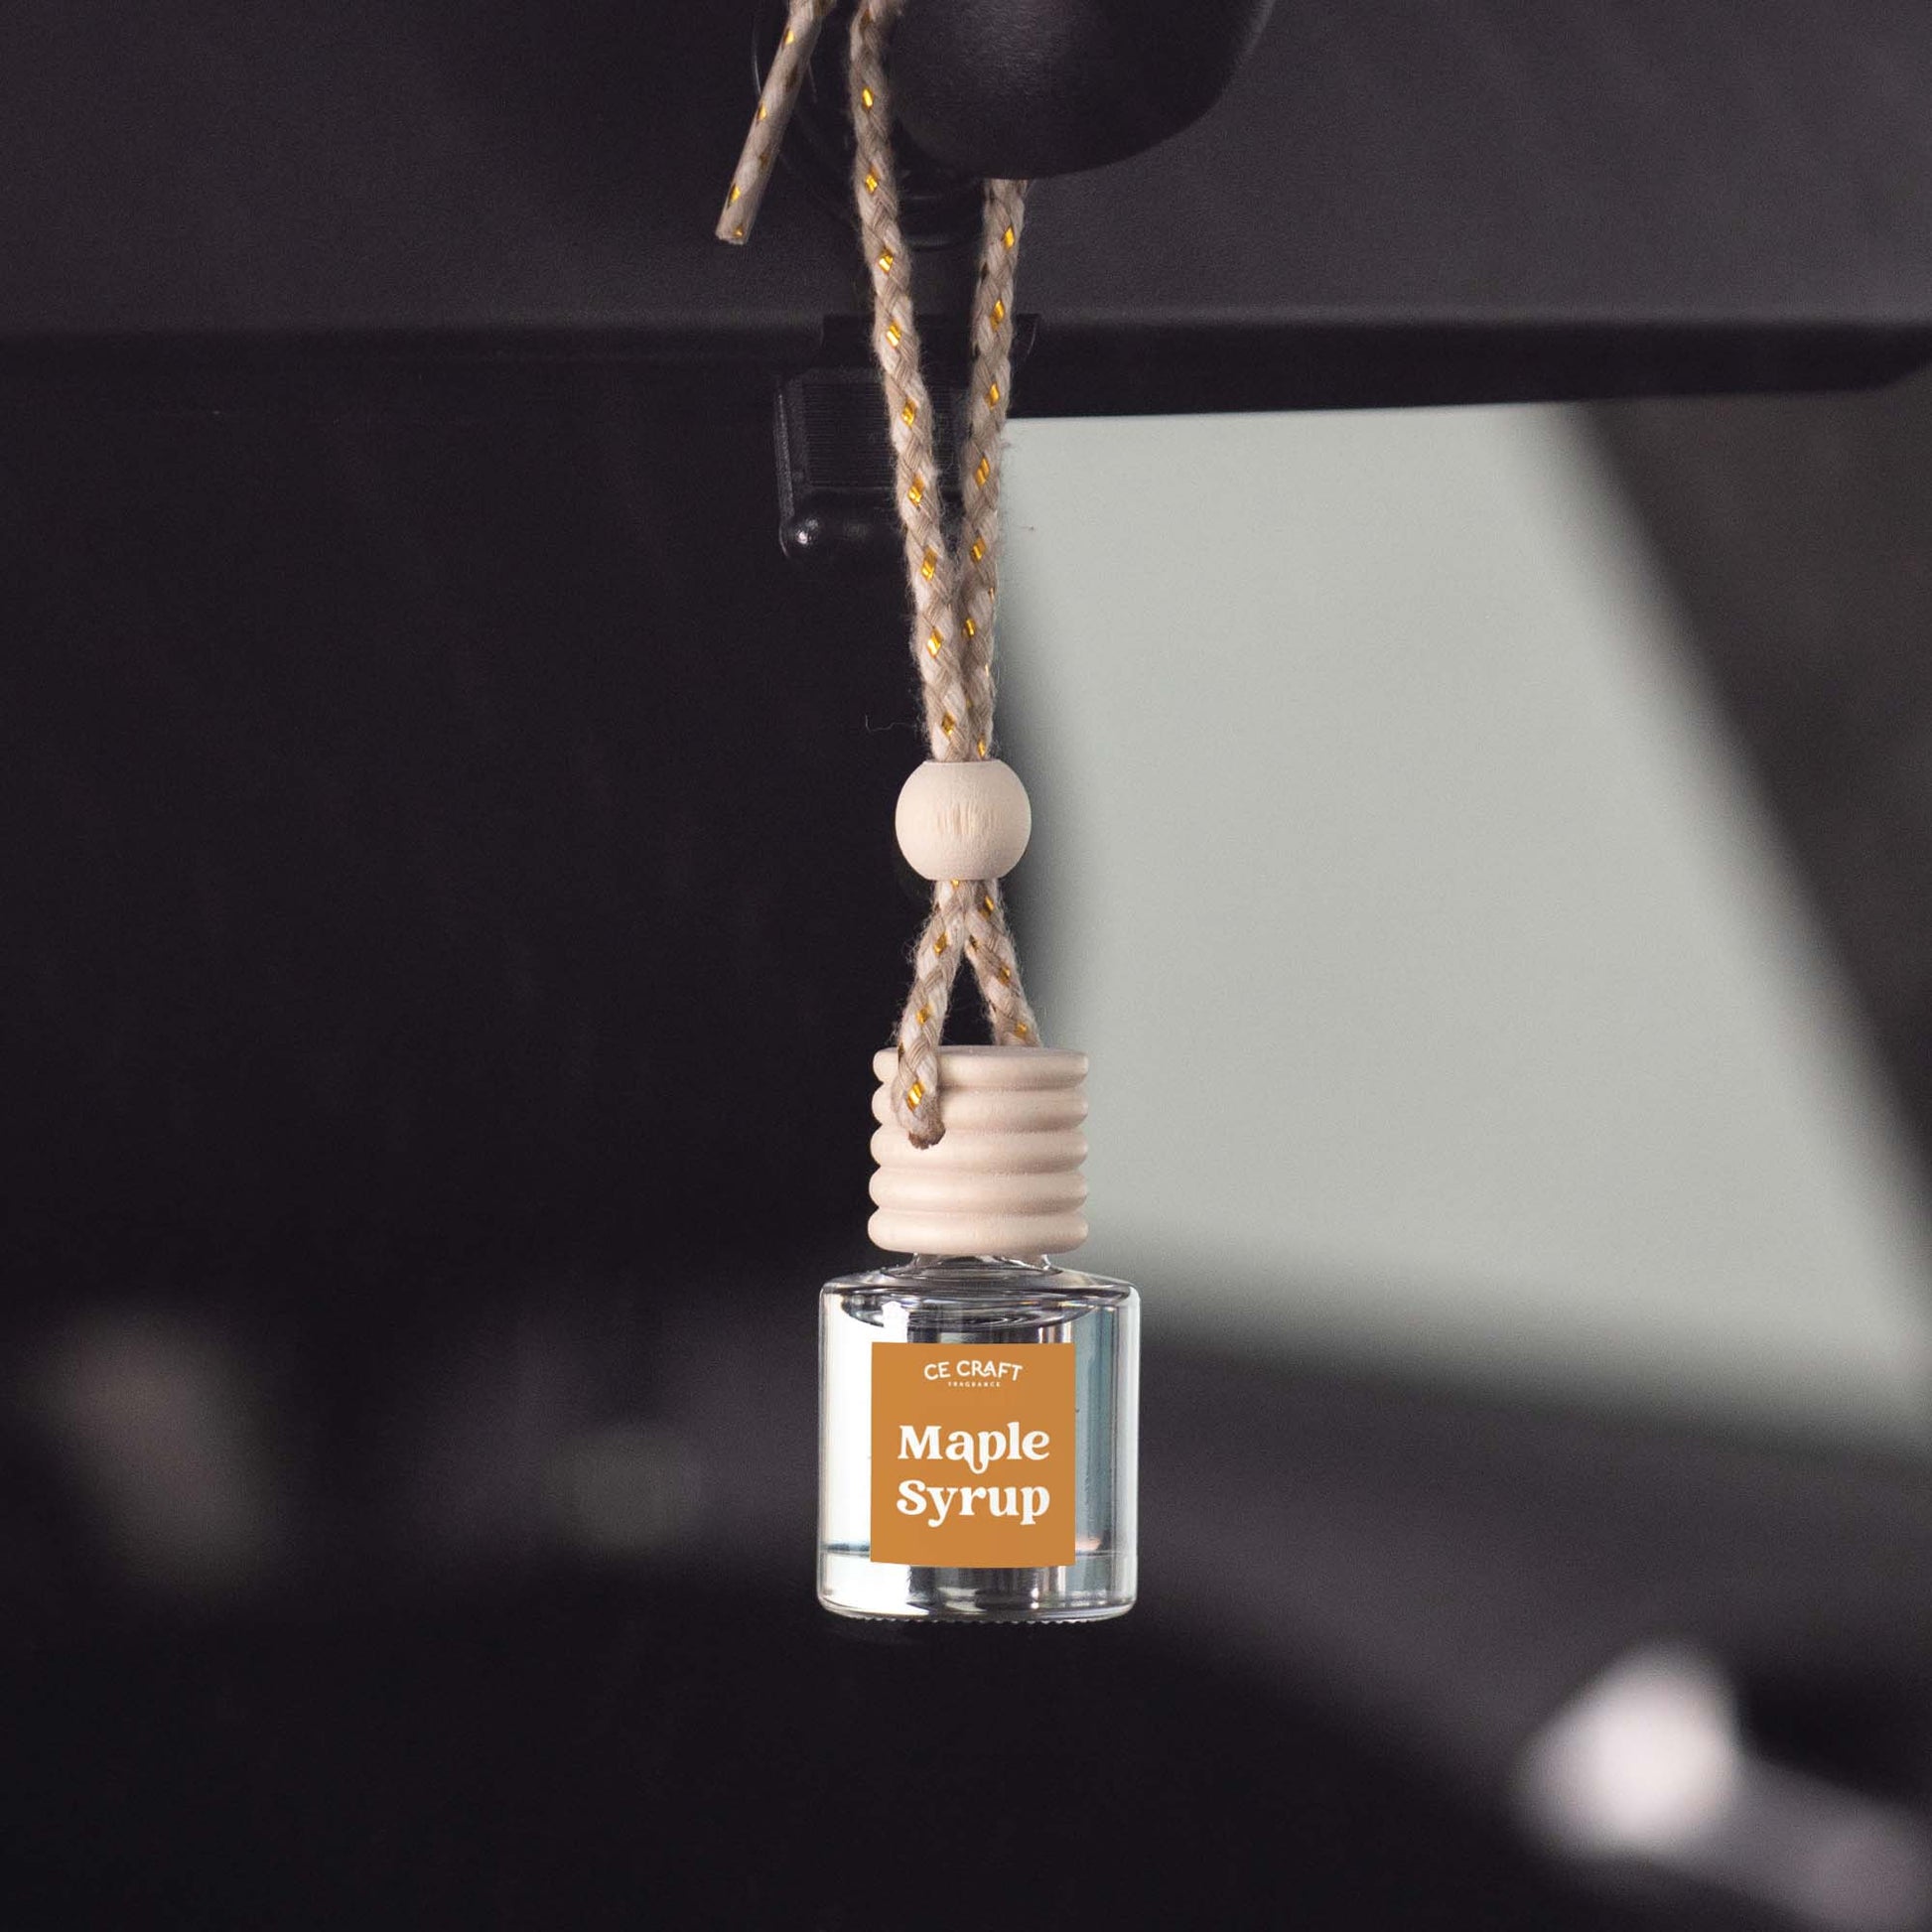 Maple Syrup Scented Car Freshener Vehicle Air Fresheners CE Craft 